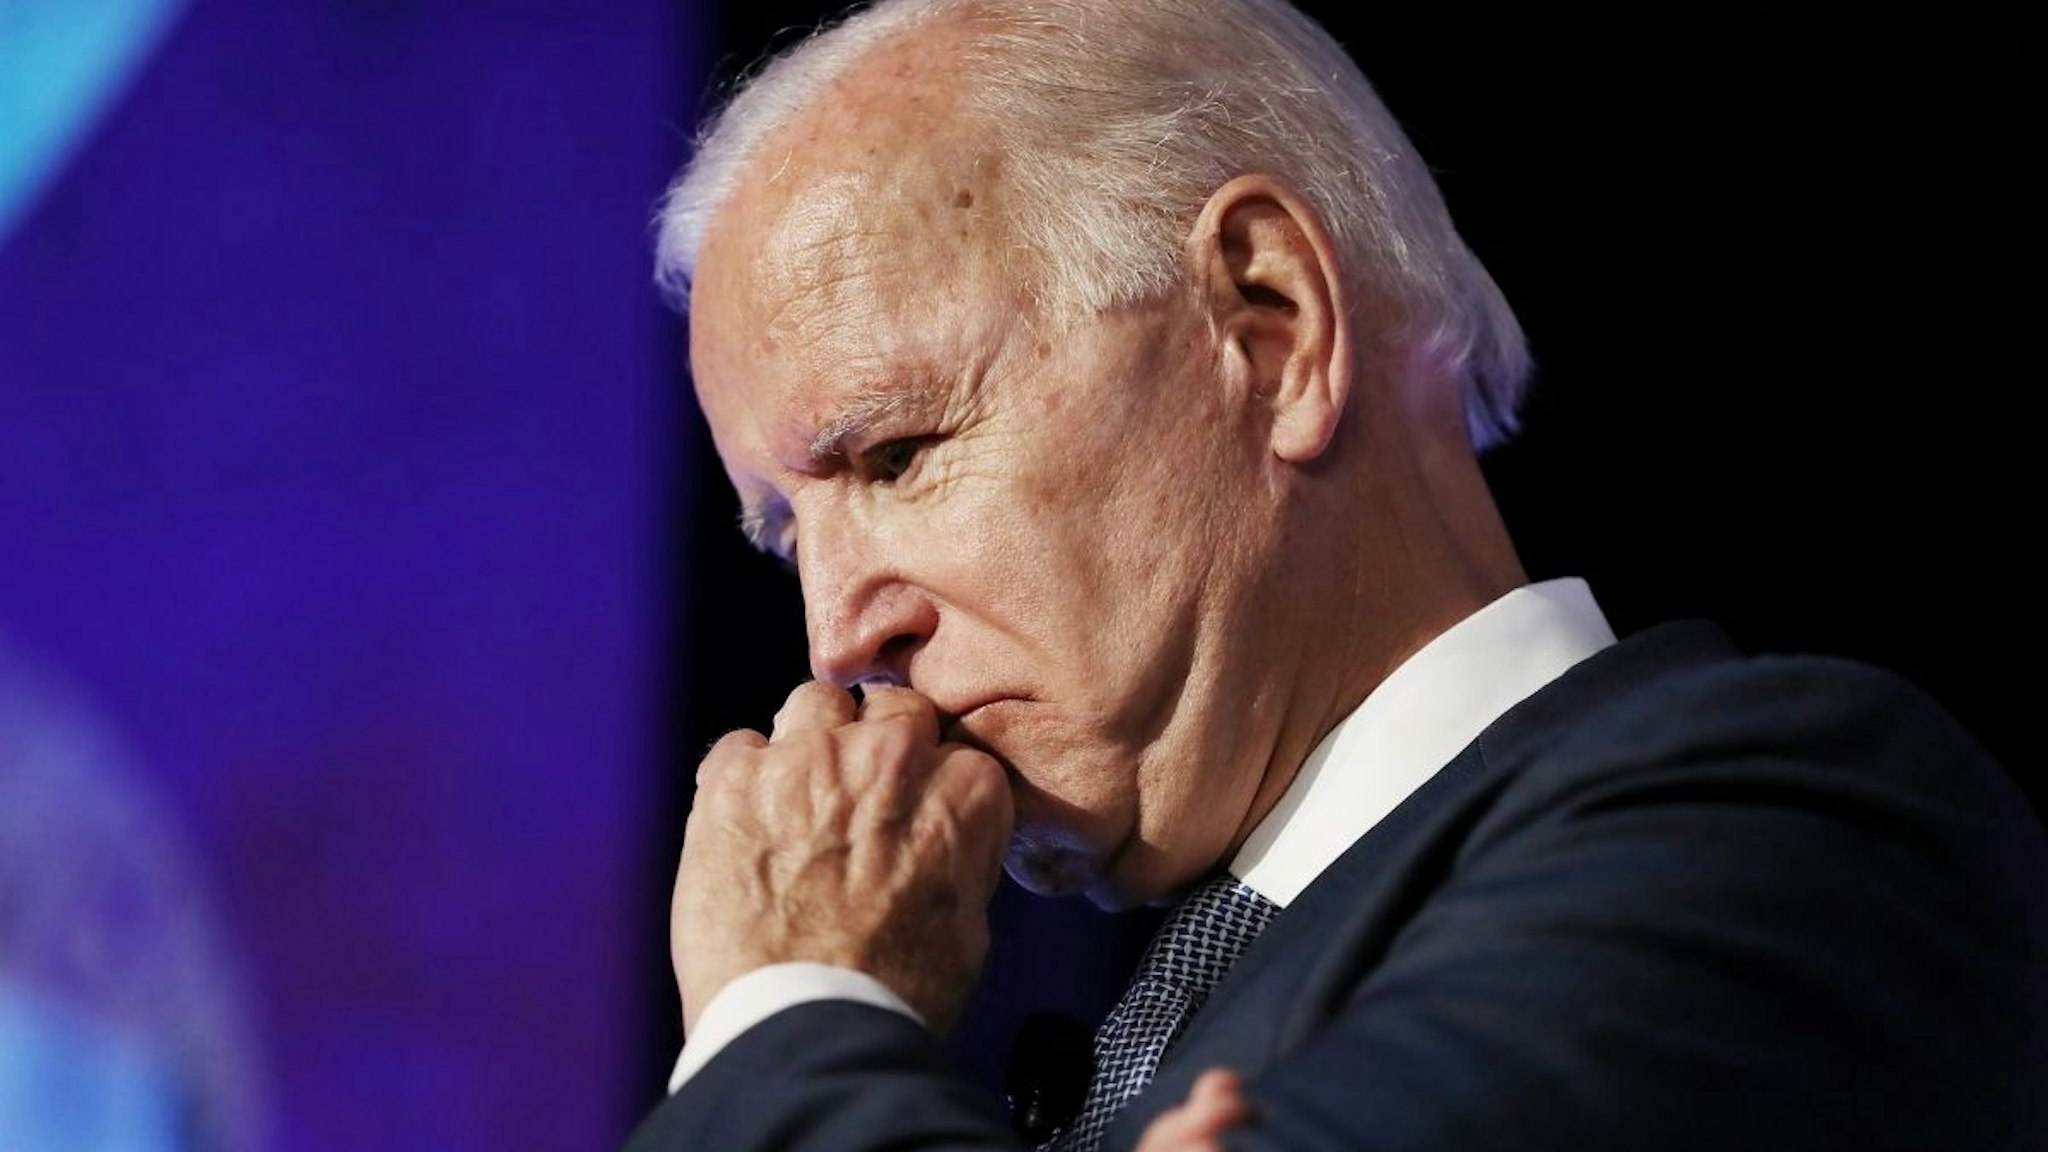 Democratic U.S. presidential candidate and former Vice President Joe Biden pauses while speaking at the SEIU Unions for All Summit on October 4, 2019 in Los Angeles, California.